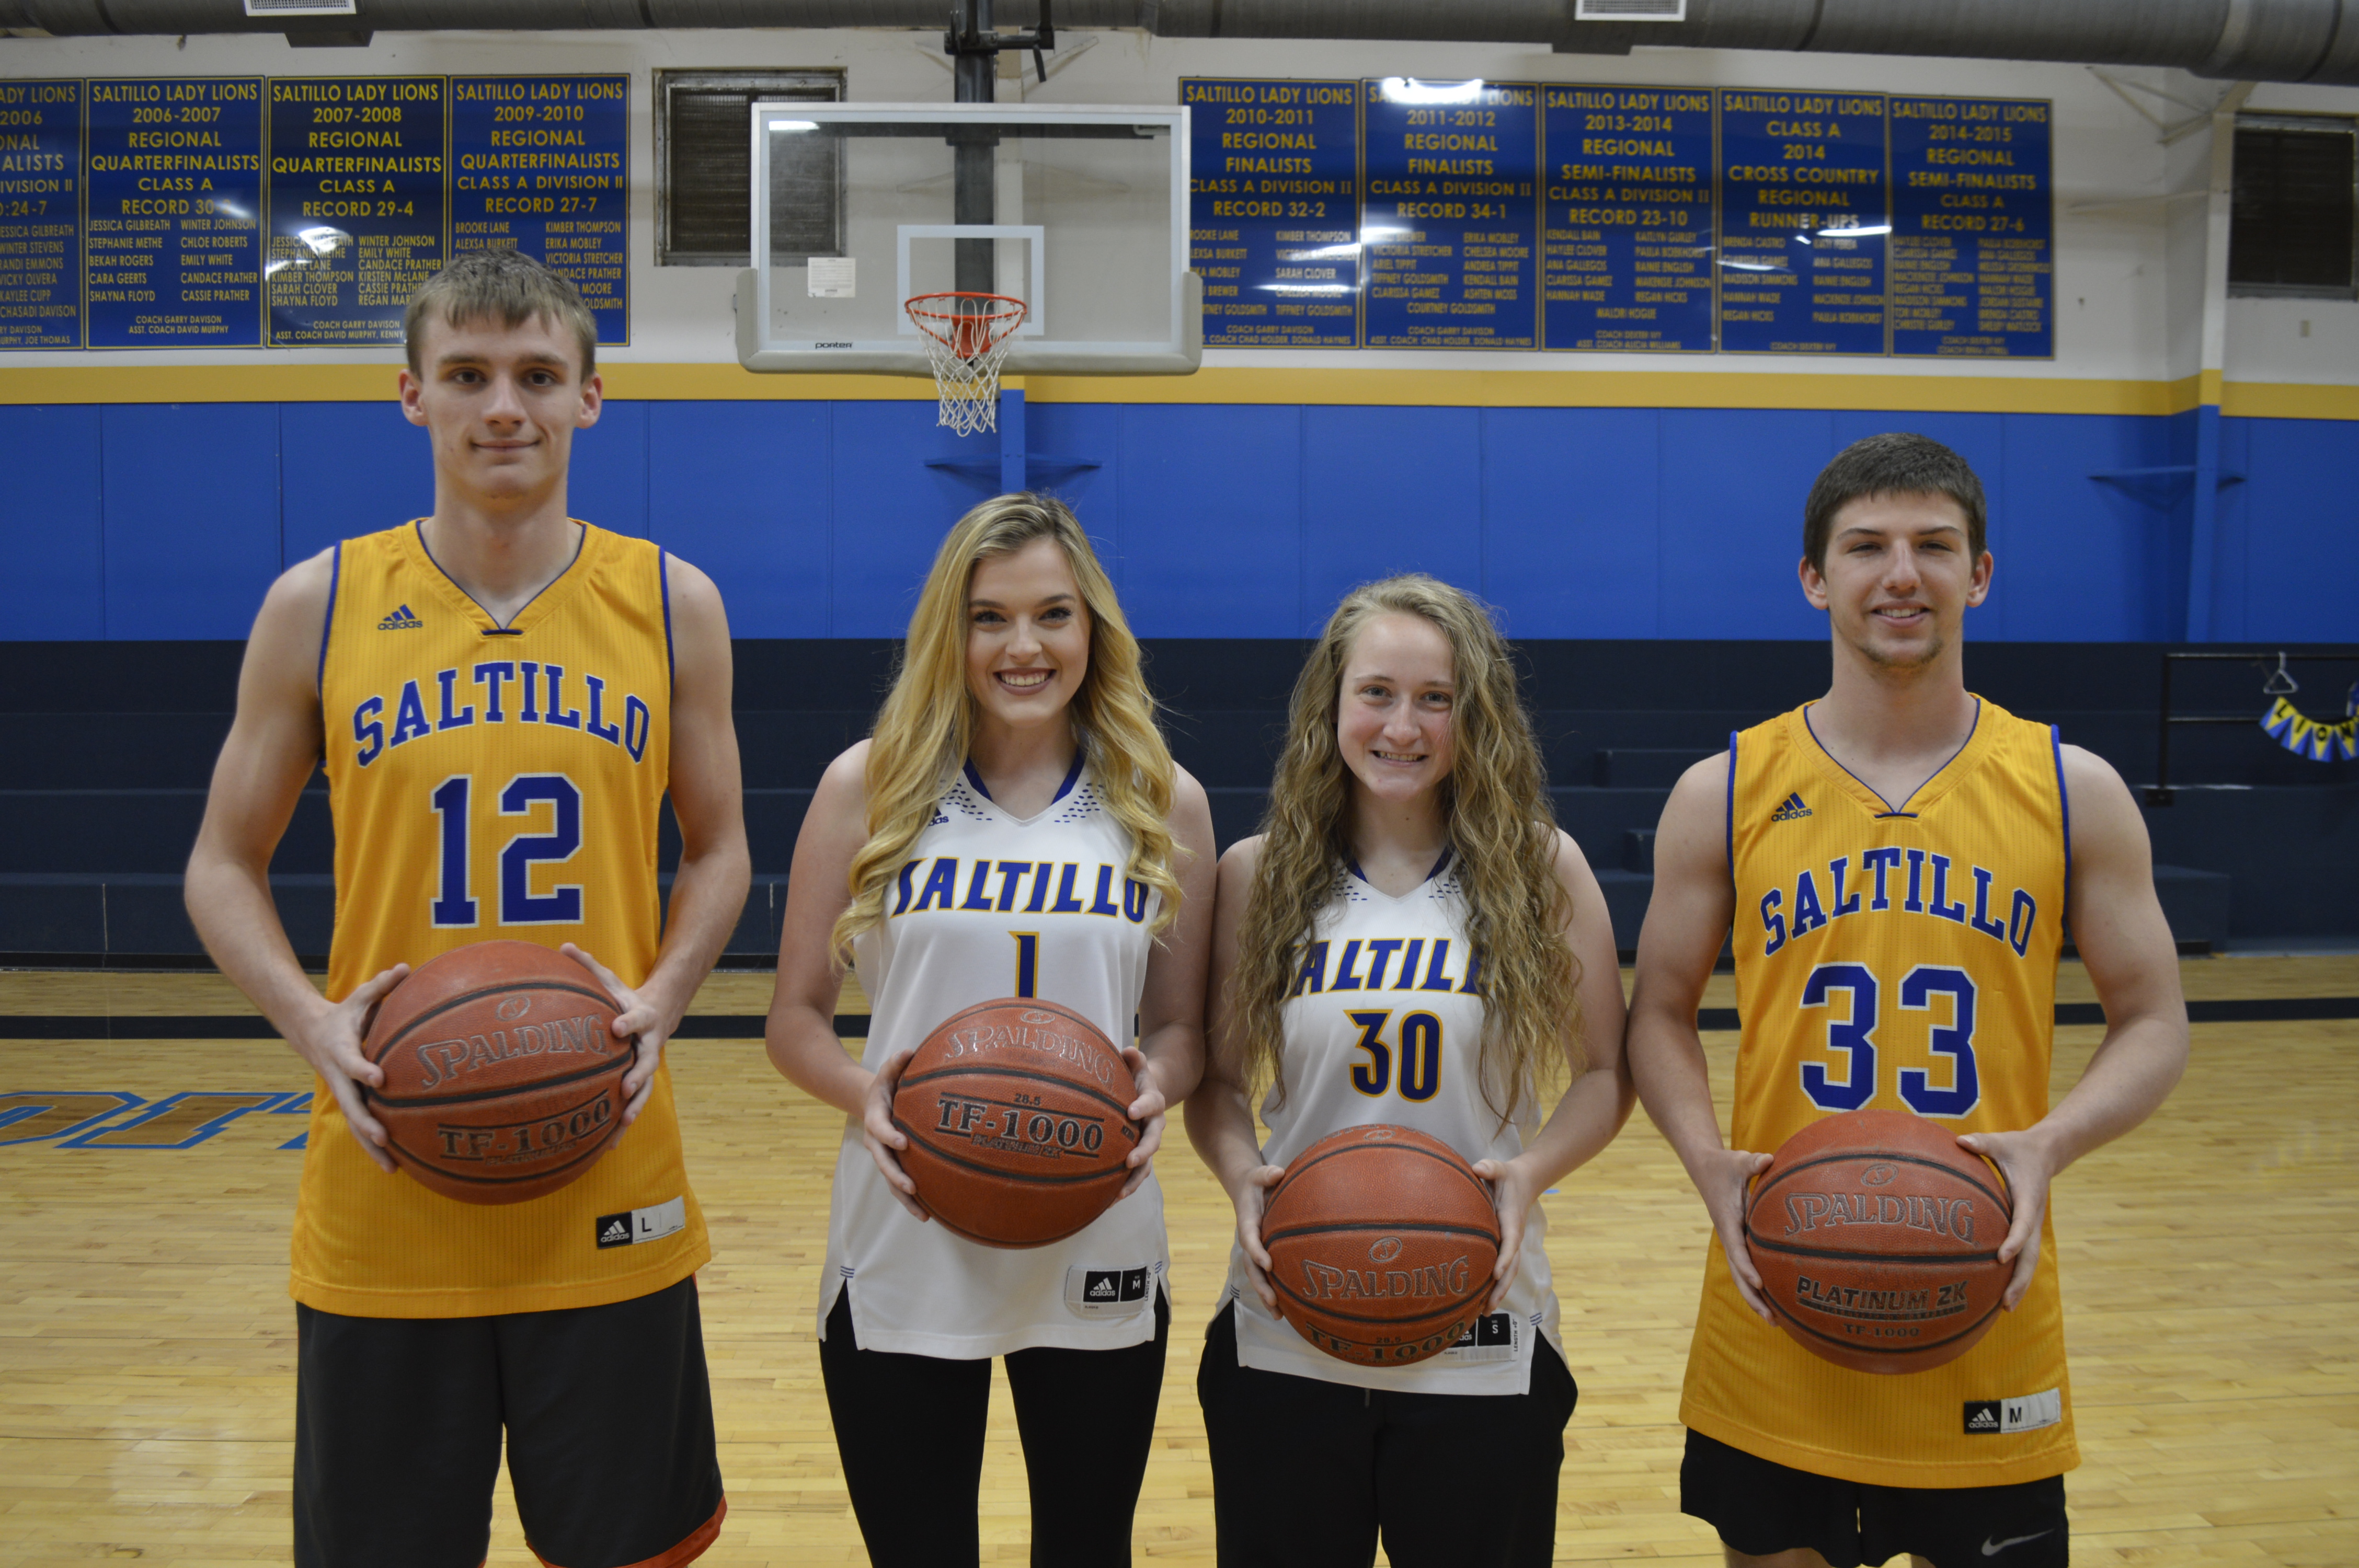 Members of Saltillo Girls and Boys Basketball Teams Named to All-Region Team.